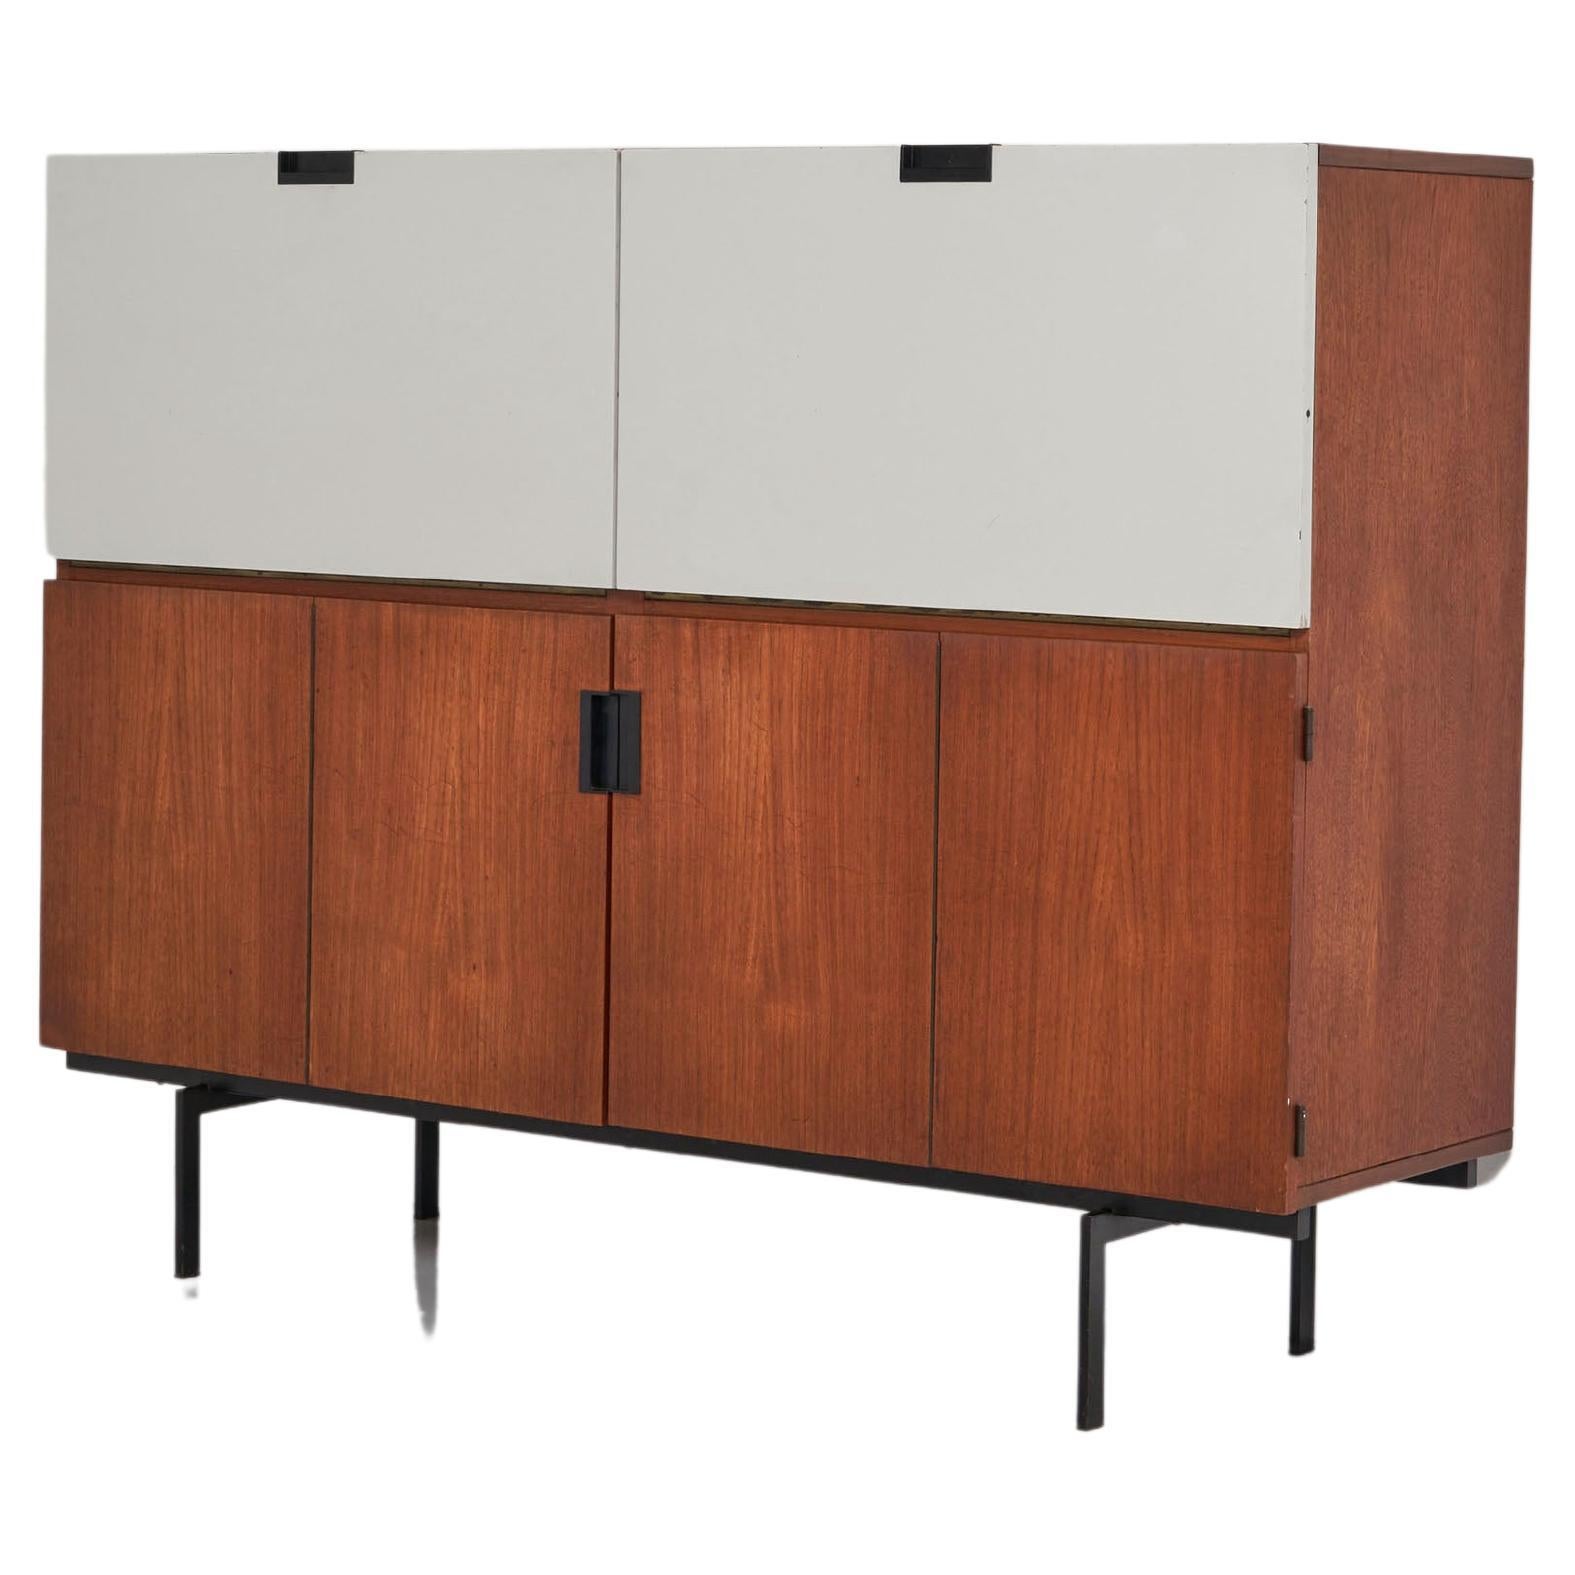 This is for a Minimalist model CU05 cabinet designed by Cees Braakman and manufactured by Pastoe UMS, The Netherlands 1958. This high cabinet is made of teak wood veneer and has a black painted metal frame. The handles are made of black plastic. The